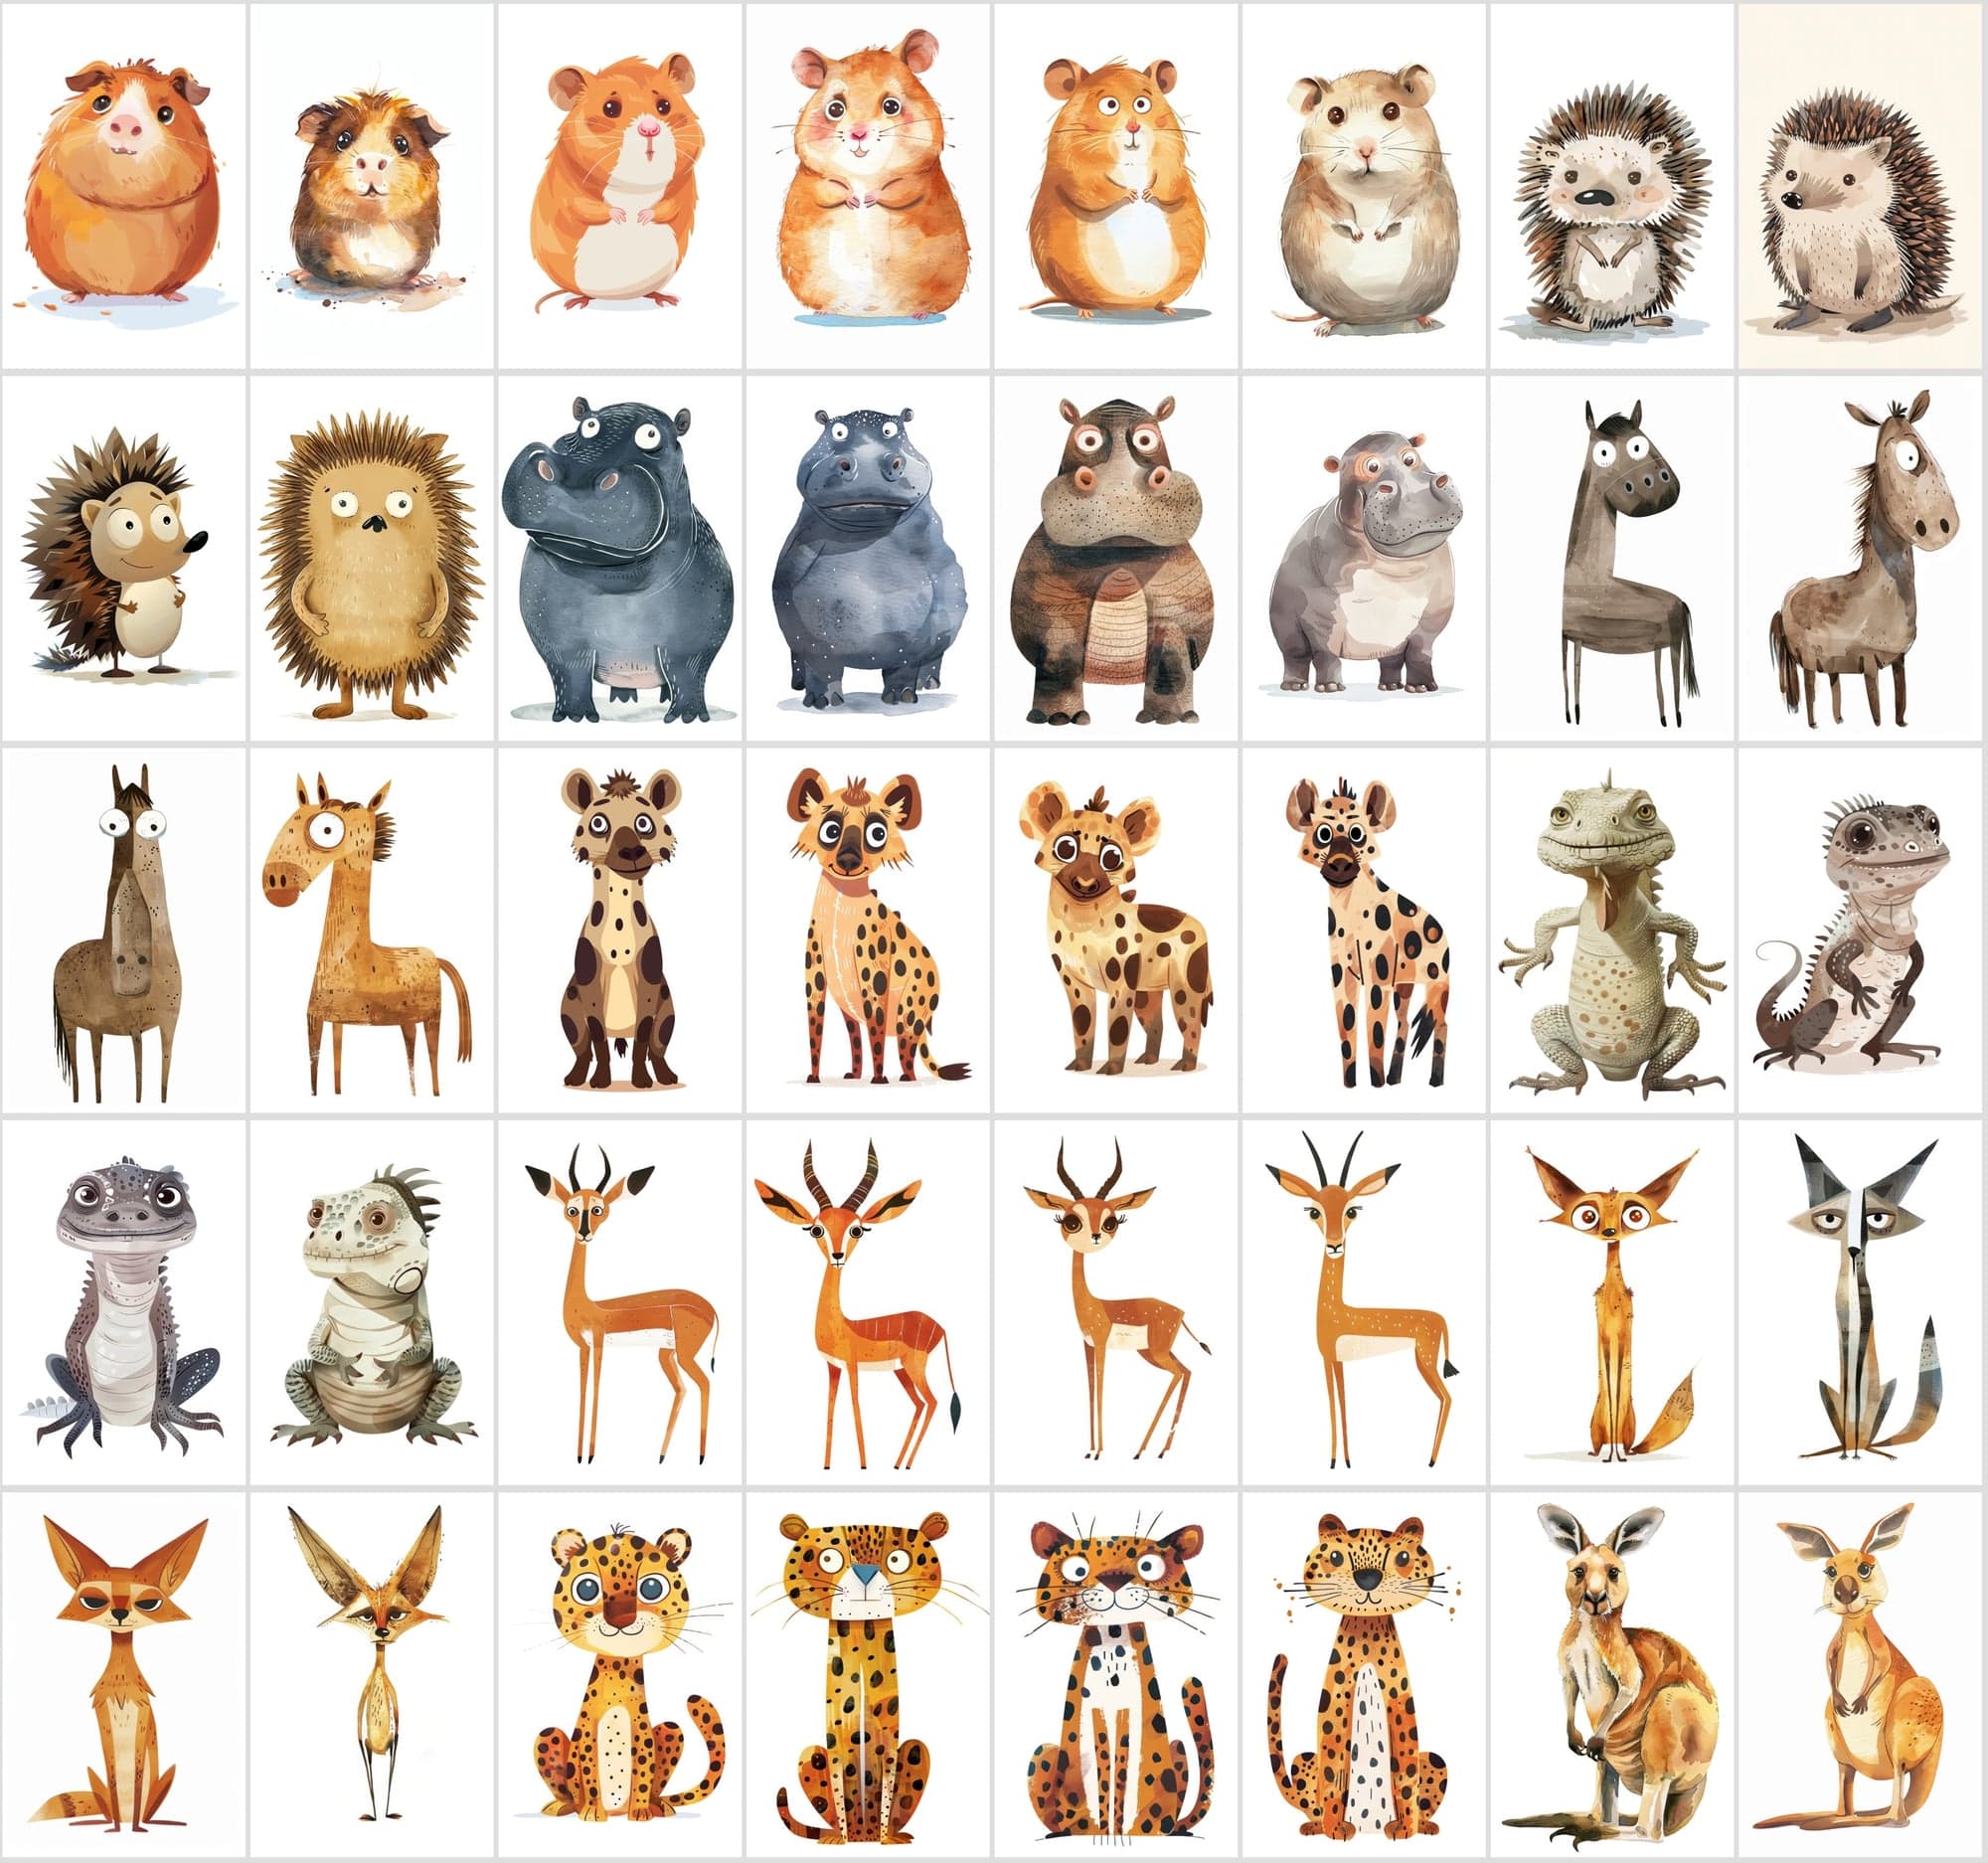 550 High-Resolution Funny Animal Illustrations - Vivid, Whimsical Art with Commercial Rights Digital Download Sumobundle